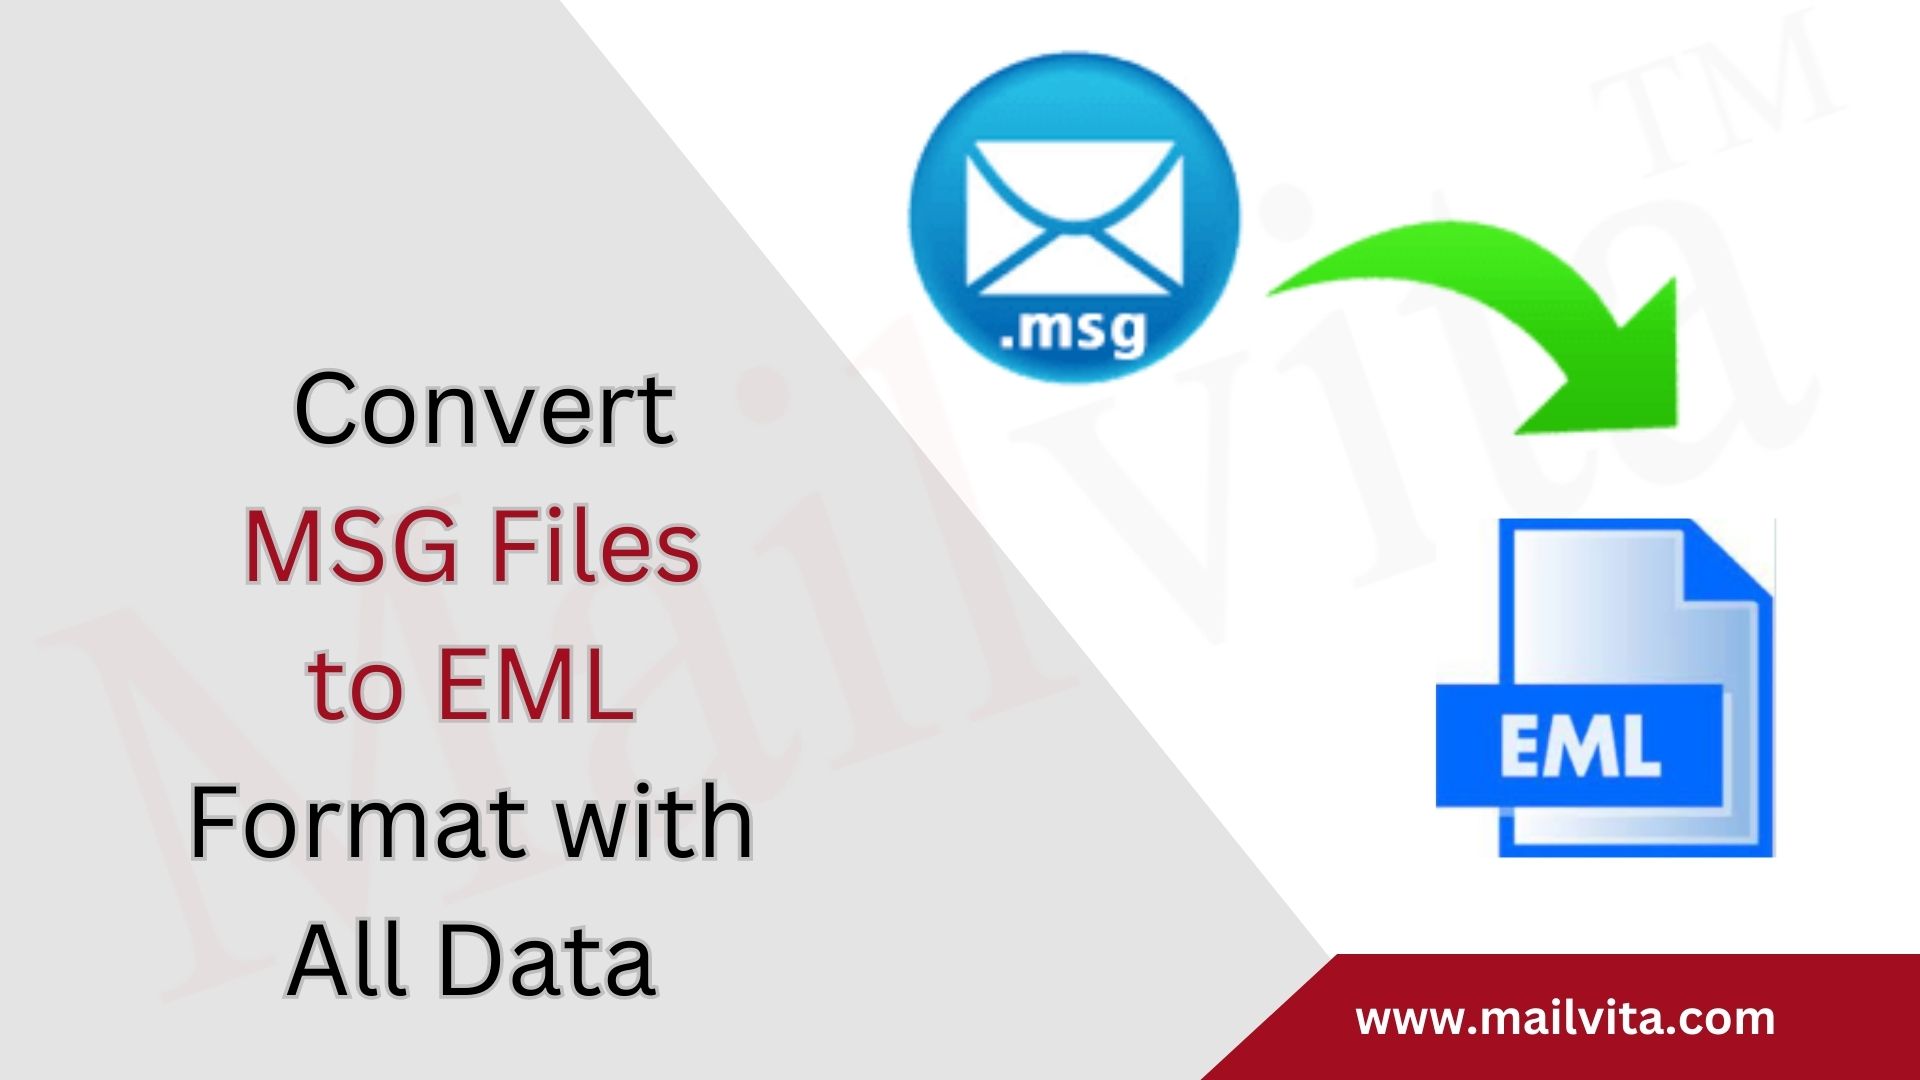 How to export an email message to the MSG and EML format